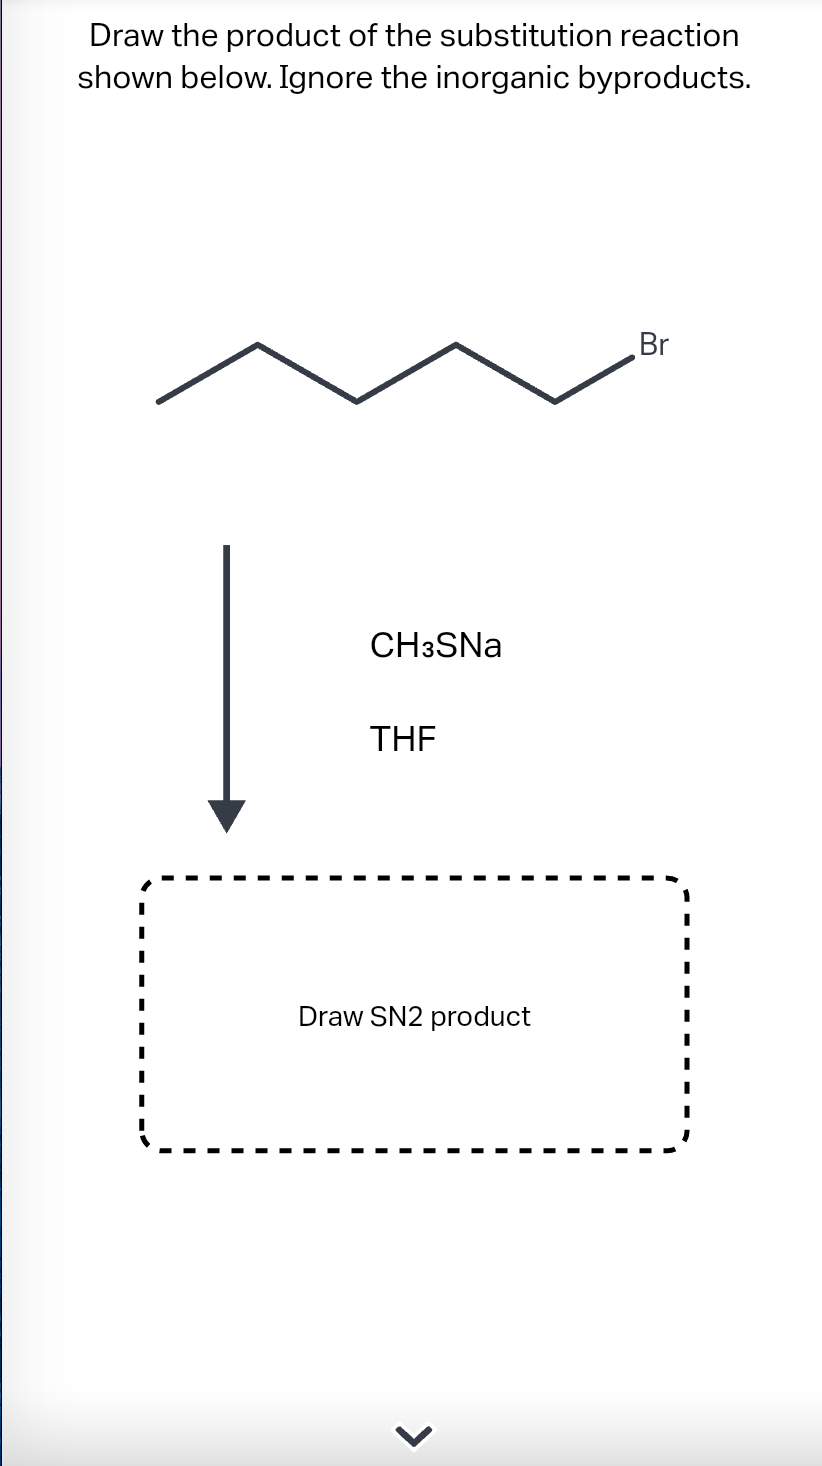 Draw the product of the substitution reaction
shown below. Ignore the inorganic byproducts.
CH3SNa
THE
Draw SN2 product
Br